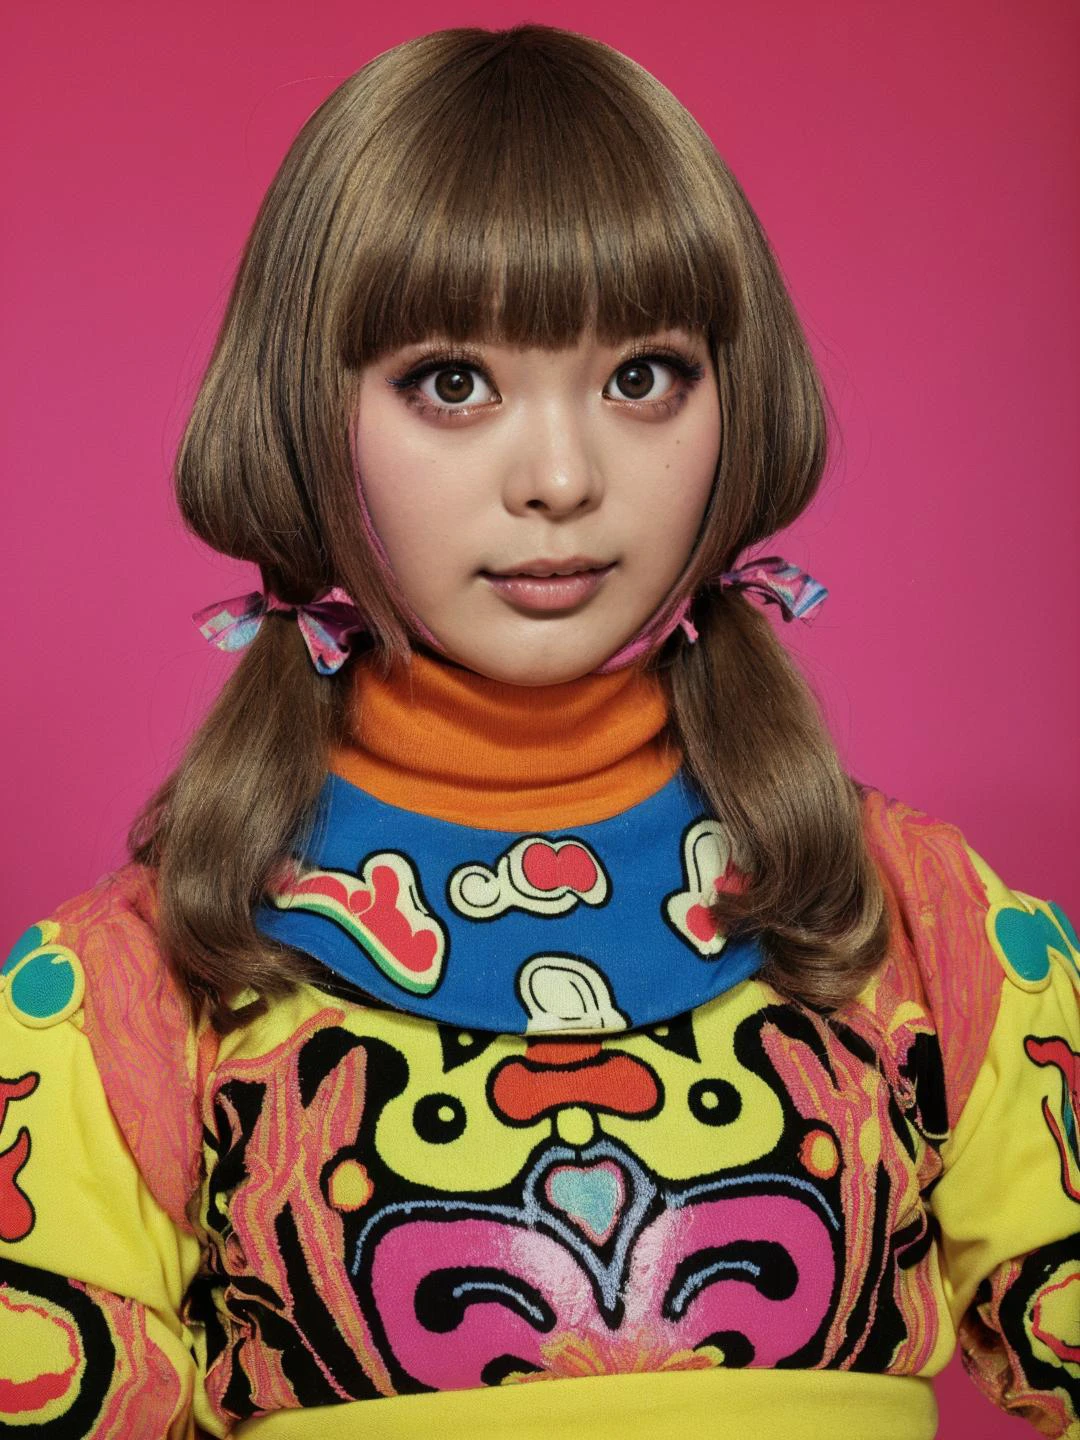 (colorful pop art, psychedelic photo by martin parr:1.2), (cute kyary:1.15), an japanese girl, girlish turtleneck, intricate light brown modern shag, primer, psychedelic colorful classroom, promotional image, kitsch movement, (vibrant colors:1.15)  